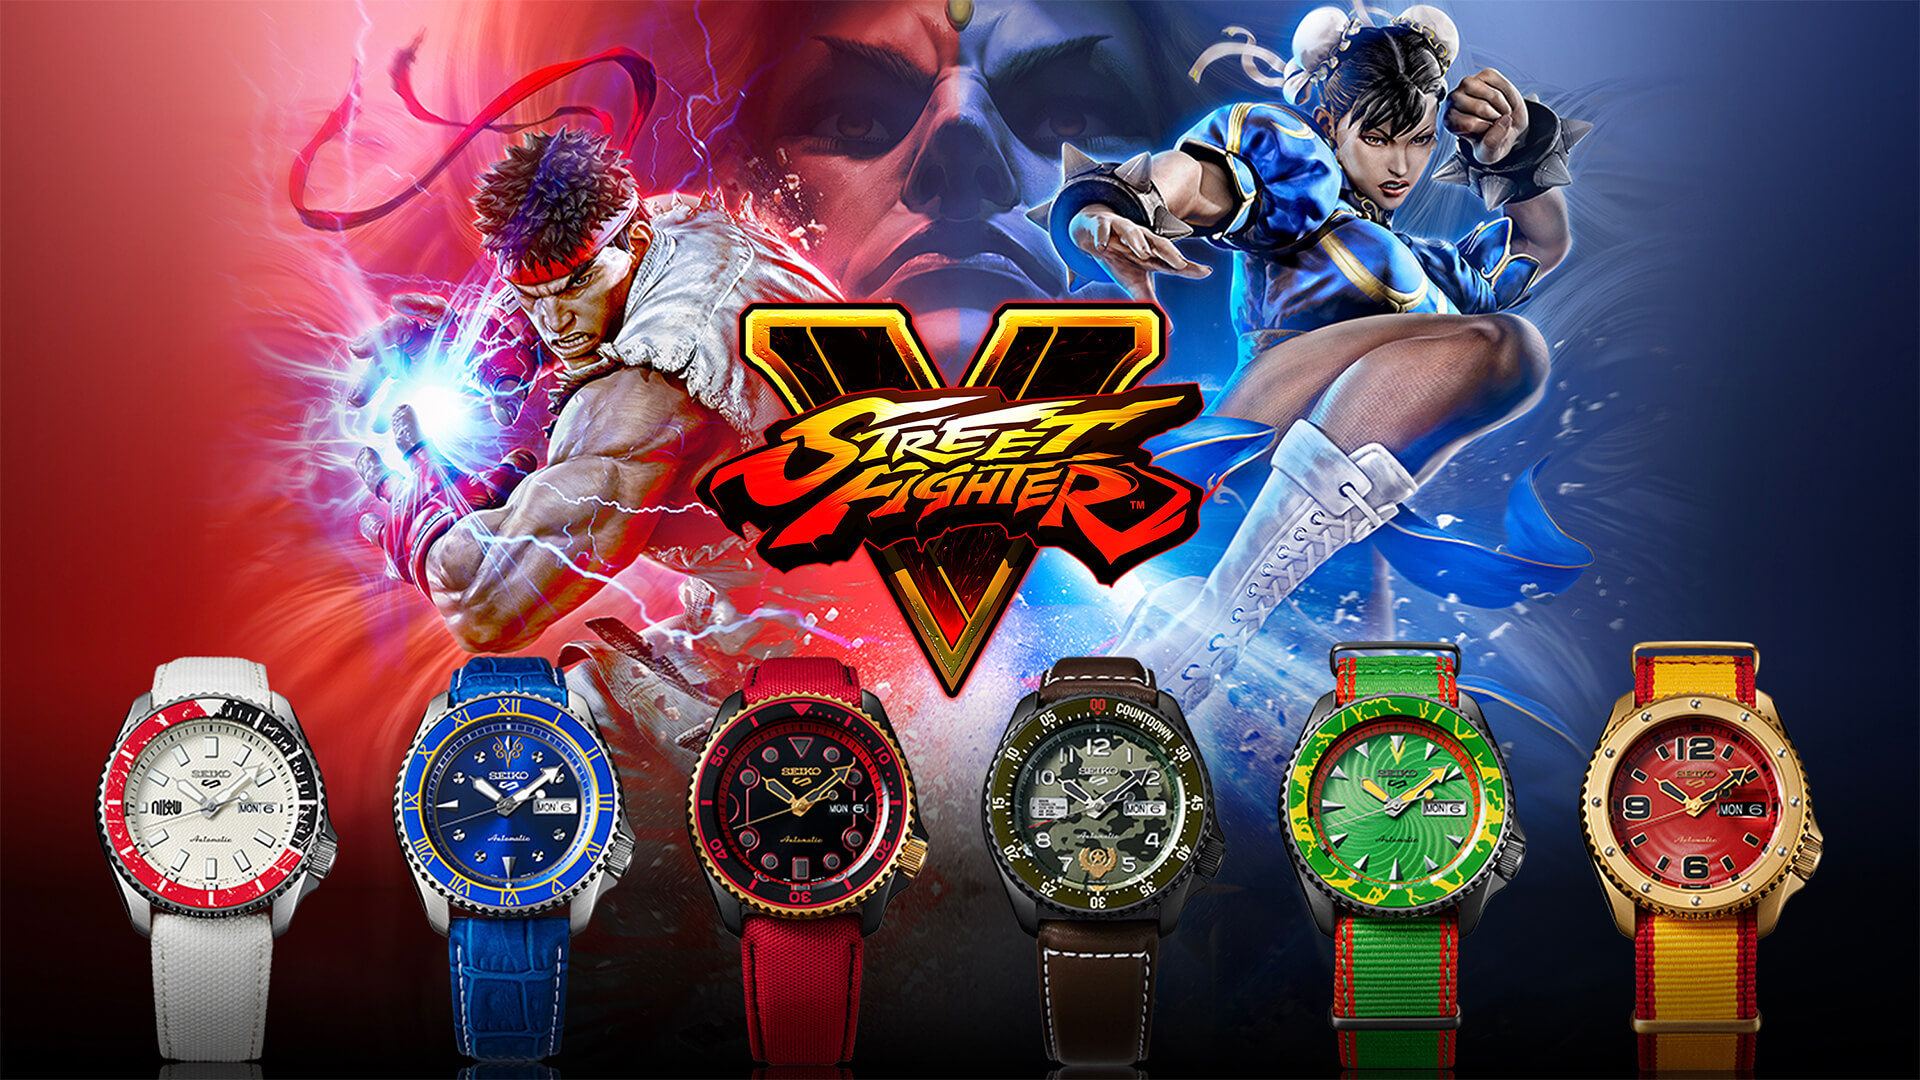 Seiko Launches Street Fighter Limited Edition Watches